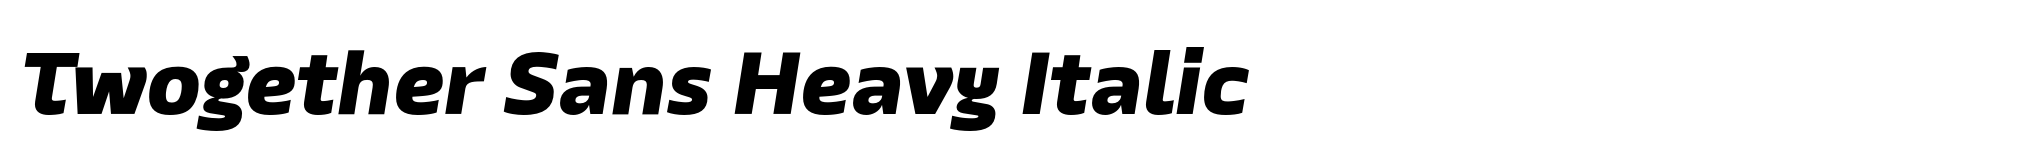 Twogether Sans Heavy Italic image